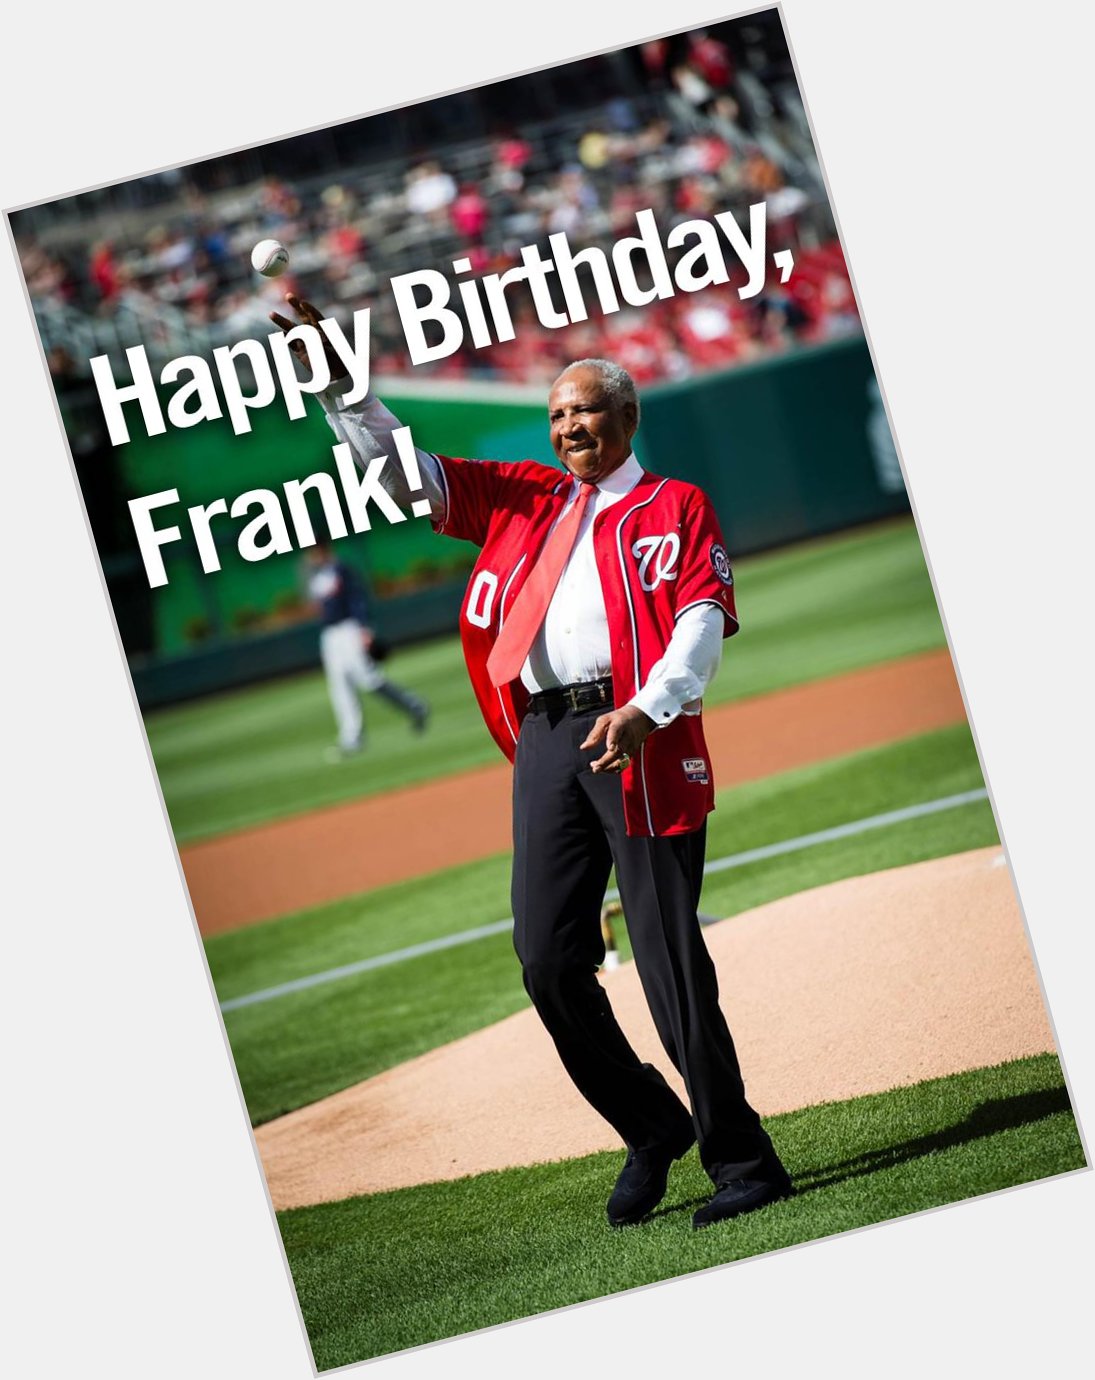 Happy 80th birthday to the inaugural manager and Hall of Famer, Frank Robinson! 